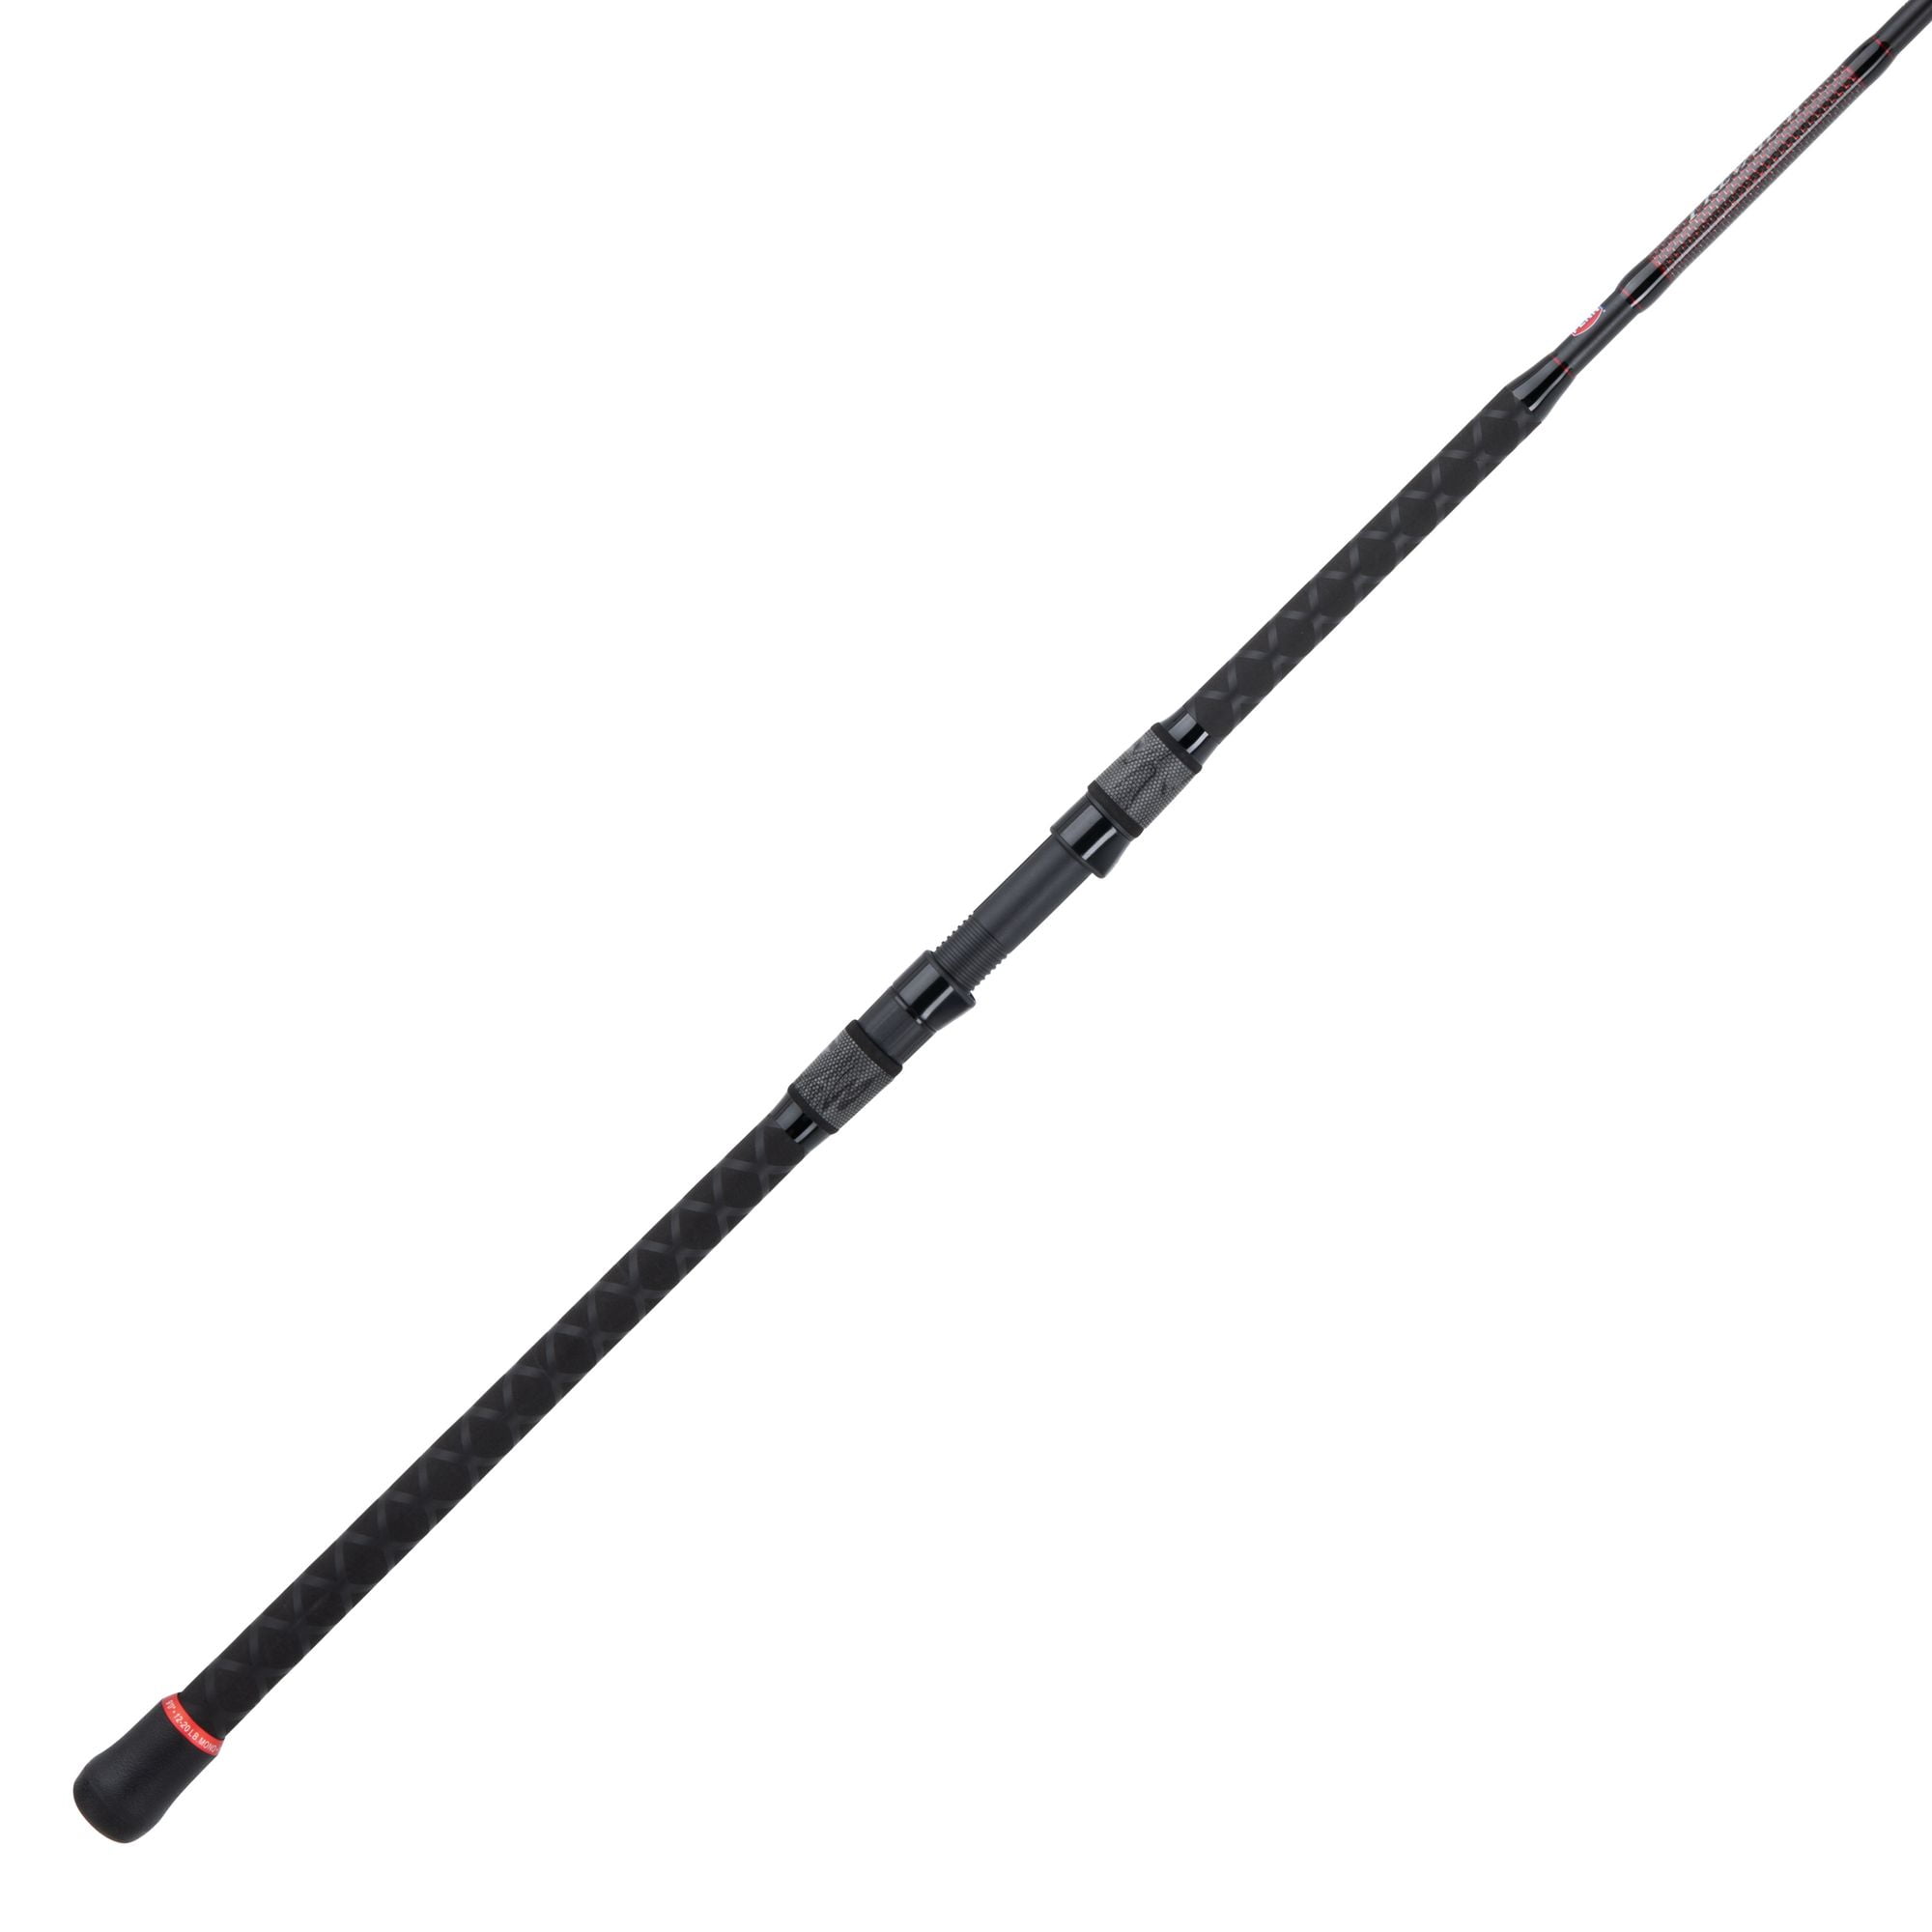 Fiblink Surf Spinning Fishing Rod 2-Piece Carbon Assorted Colors Sizes 